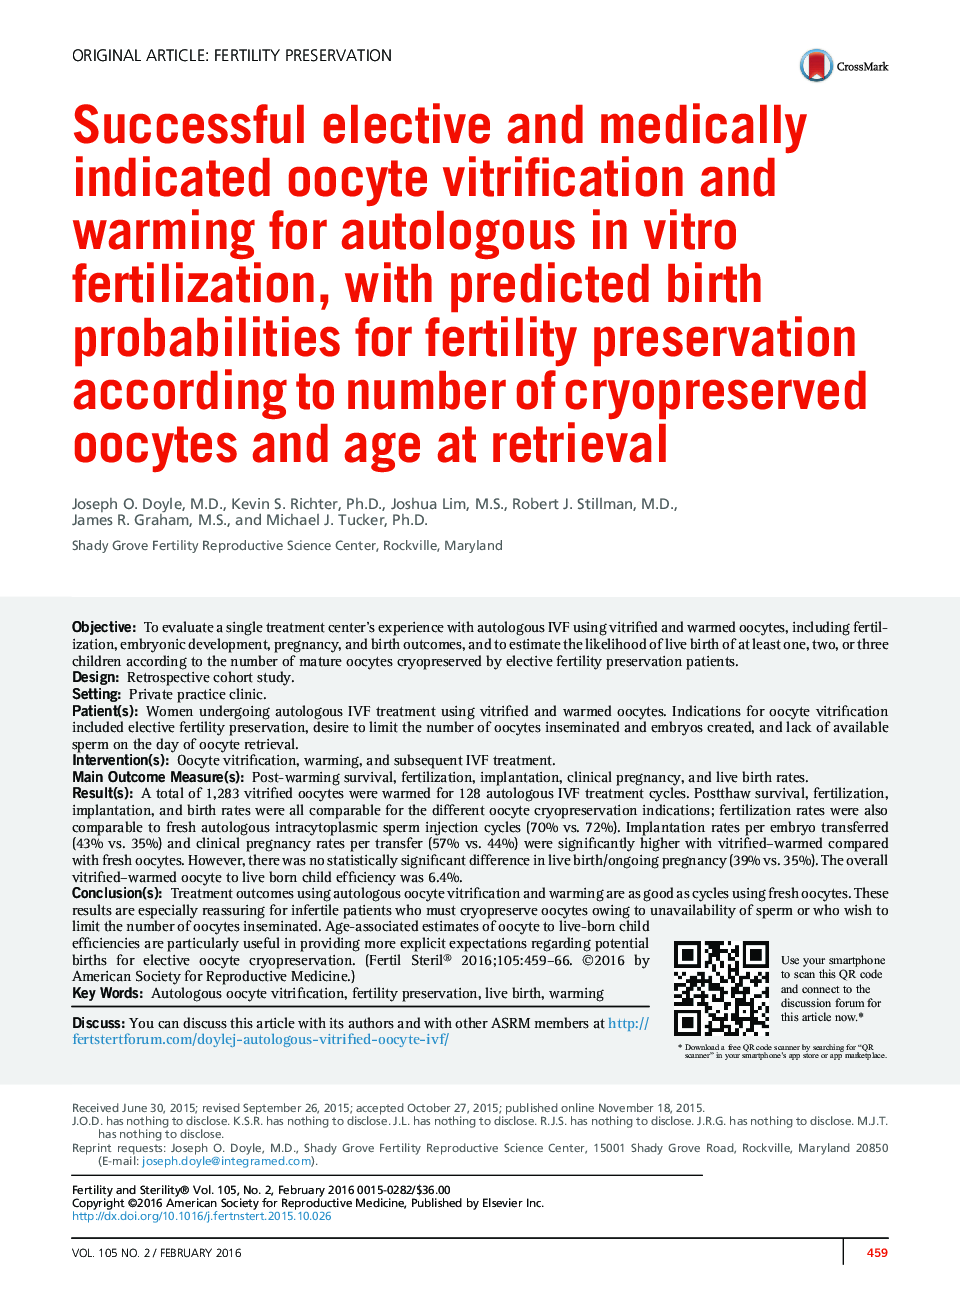 Successful elective and medically indicated oocyte vitrification and warming for autologous inÂ vitro fertilization, with predicted birth probabilities for fertility preservation according to number of cryopreserved oocytes and age at retrieval